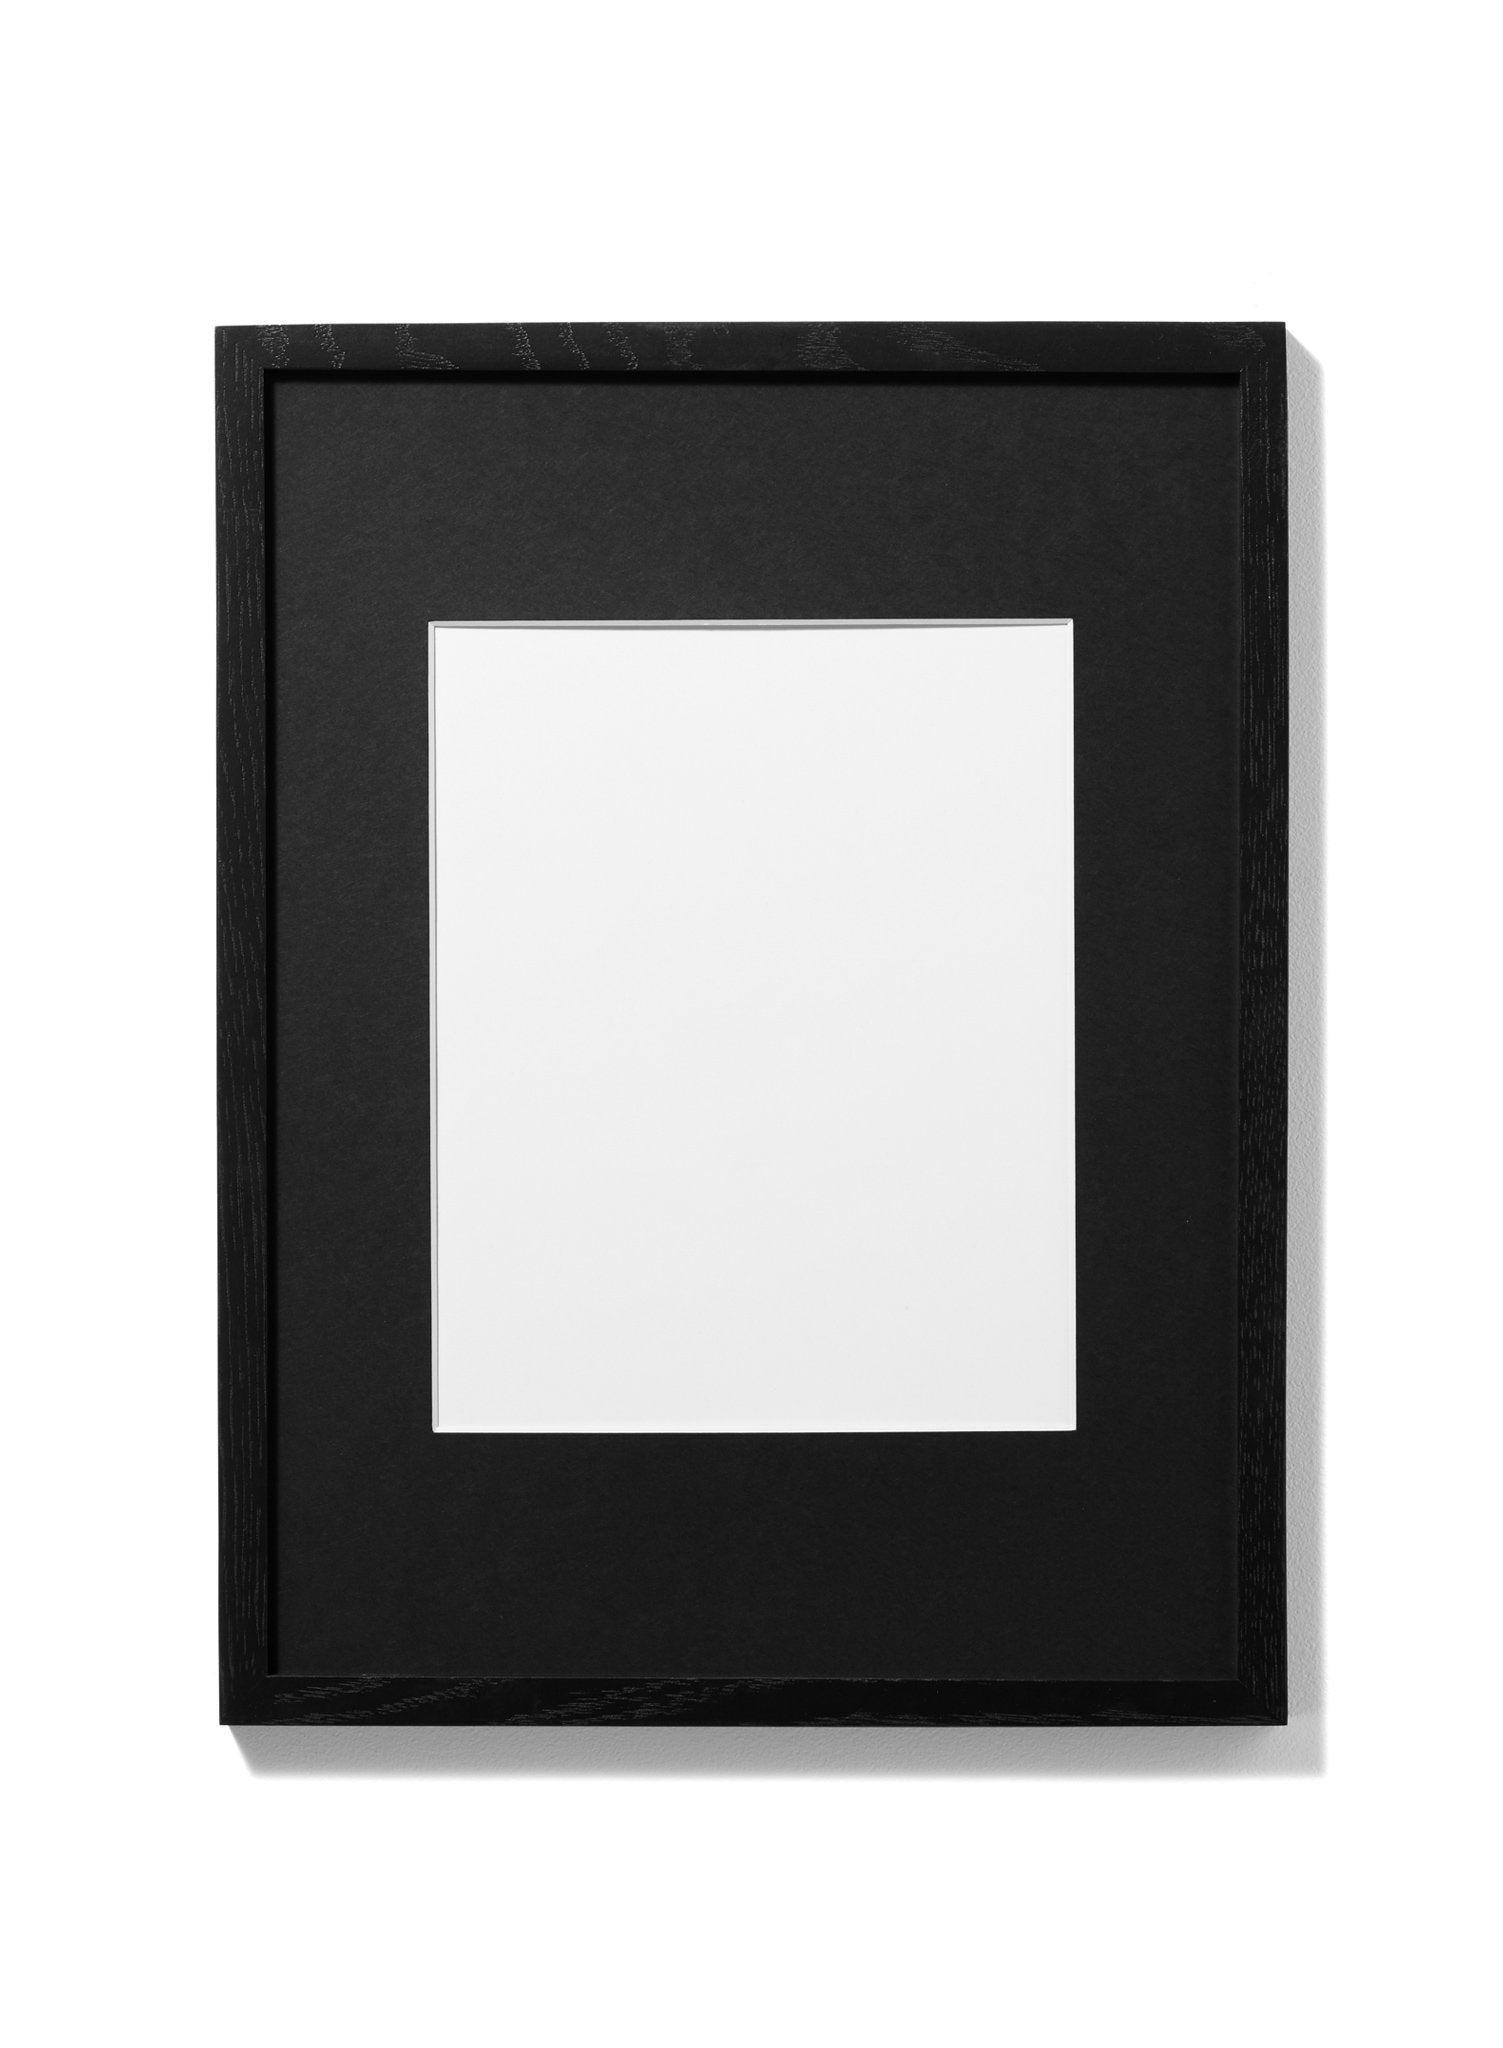 Scandinavian black mat passepartout by Opposite Wall in a frame- for a frame size 12x16